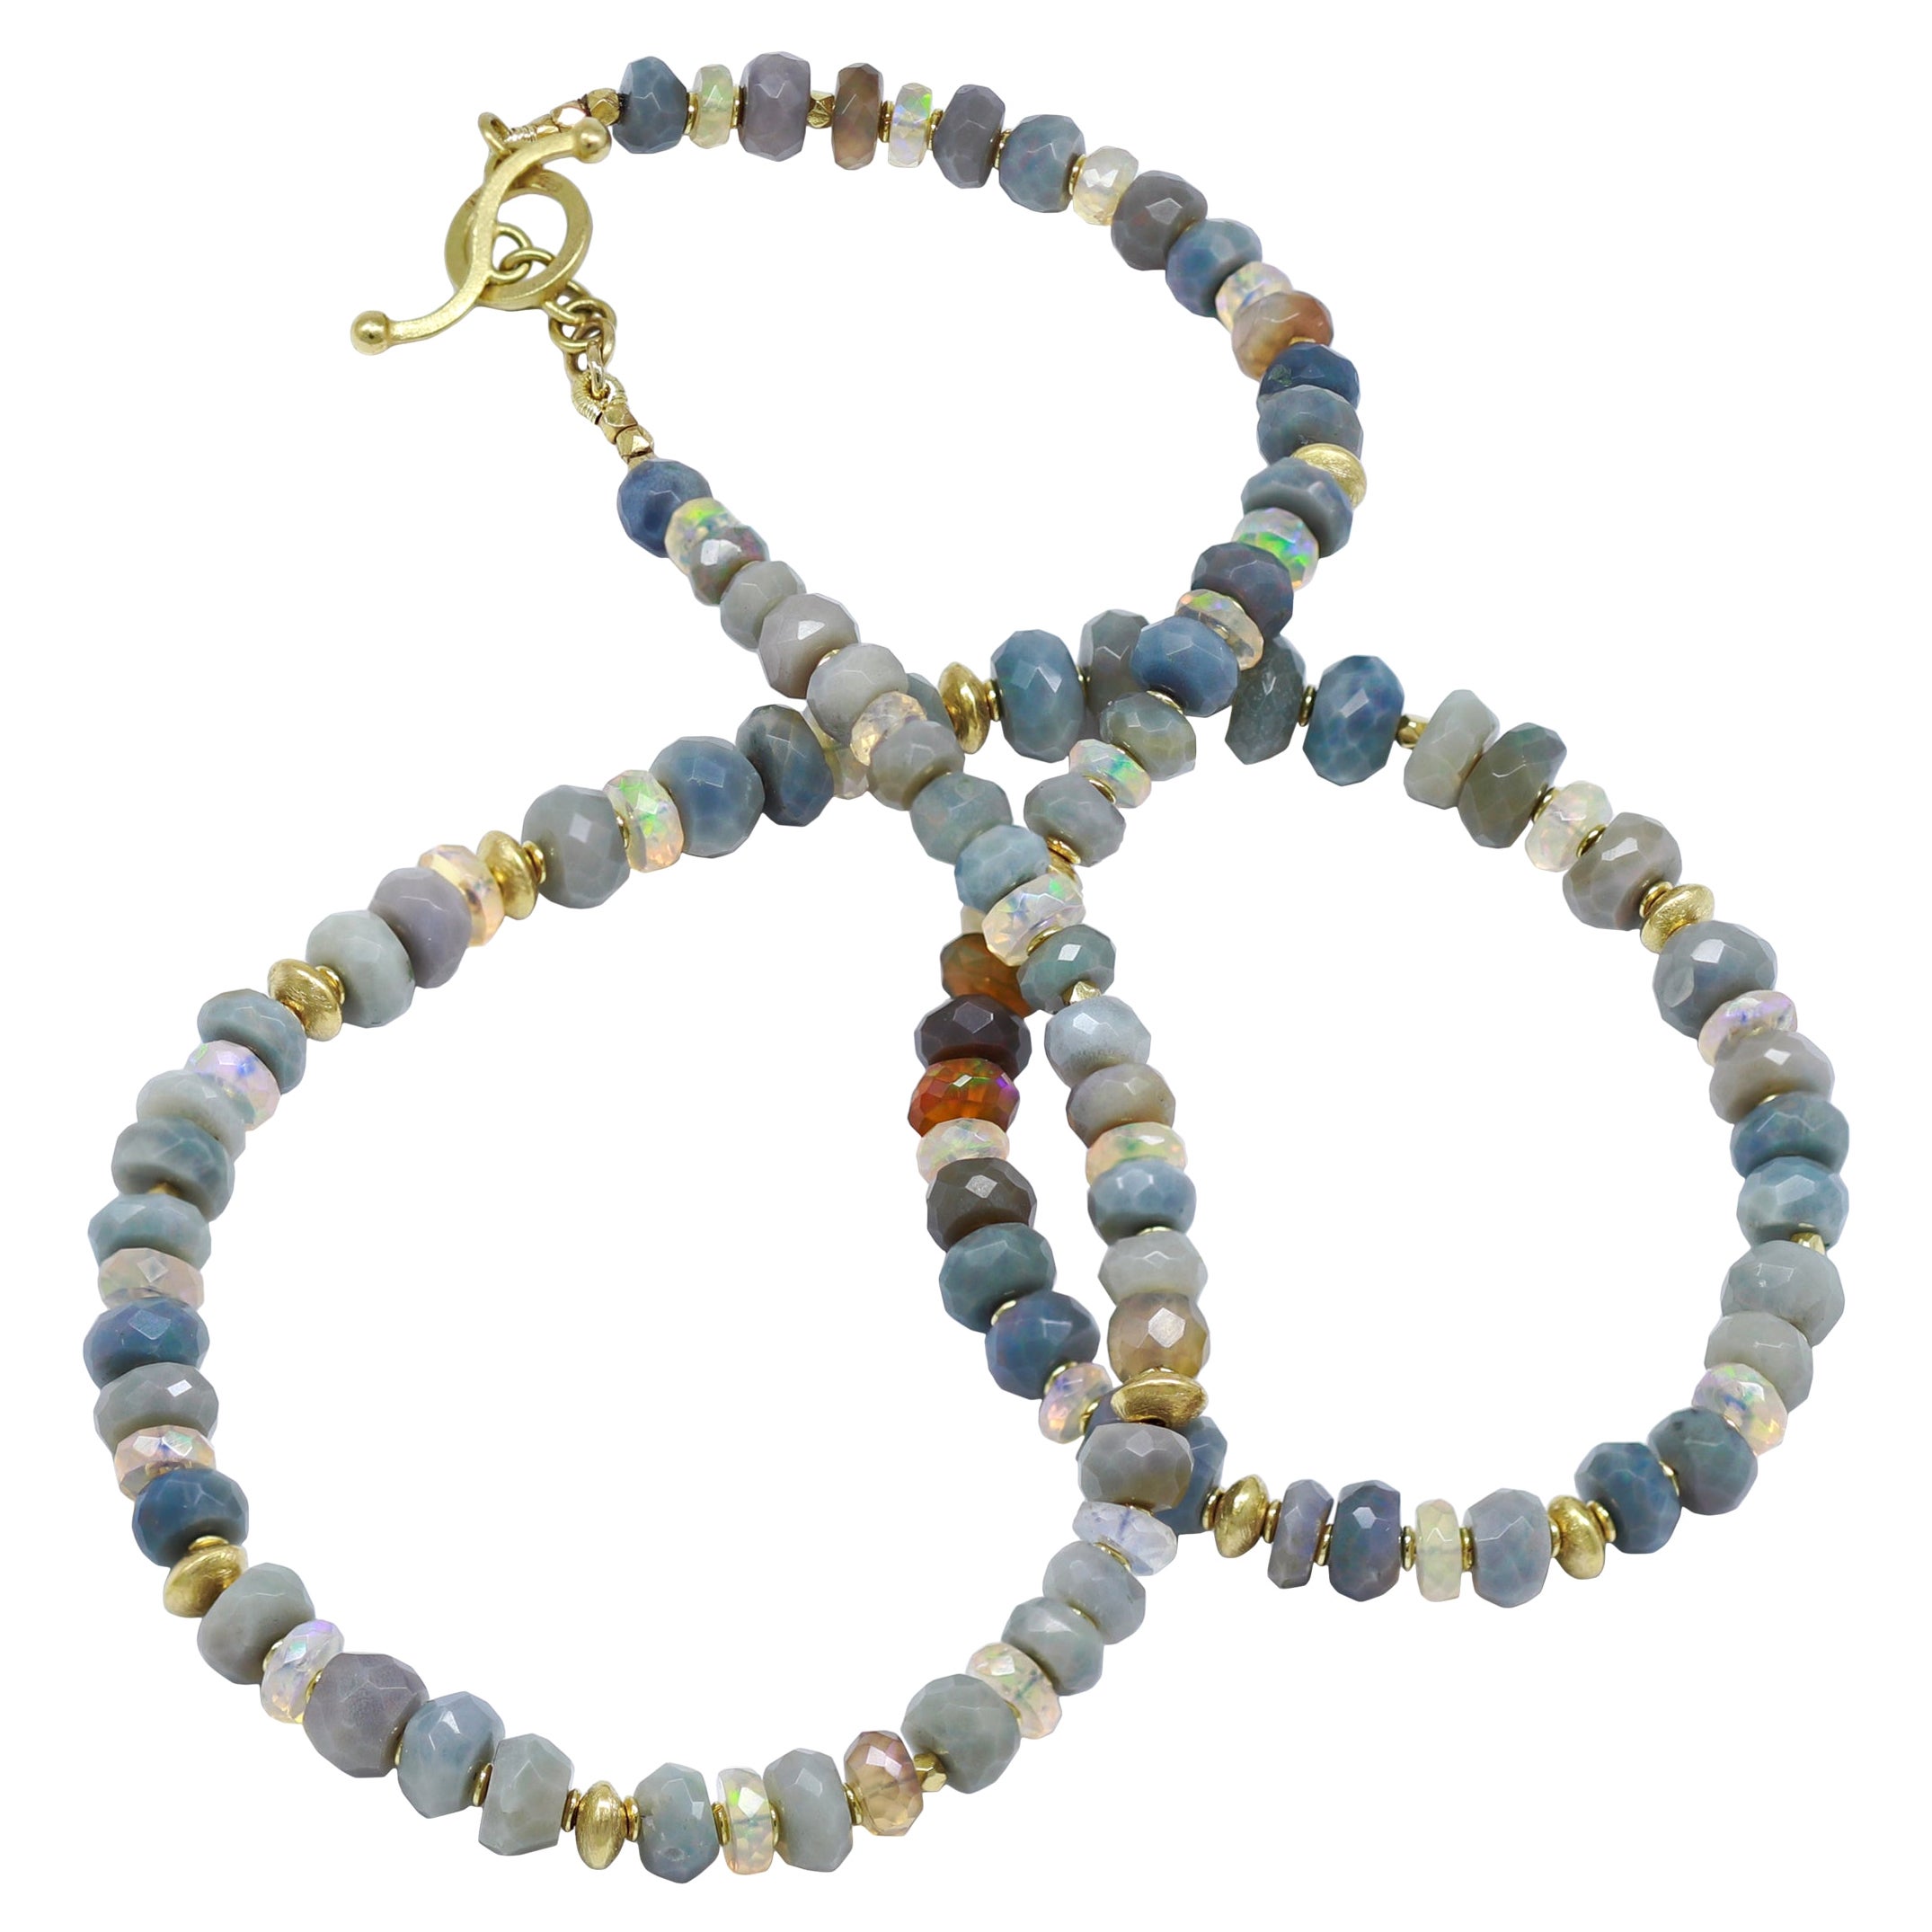 Barbara Heinrich Faceted Australian and Ethiopian Opal Rondel Gold Necklace